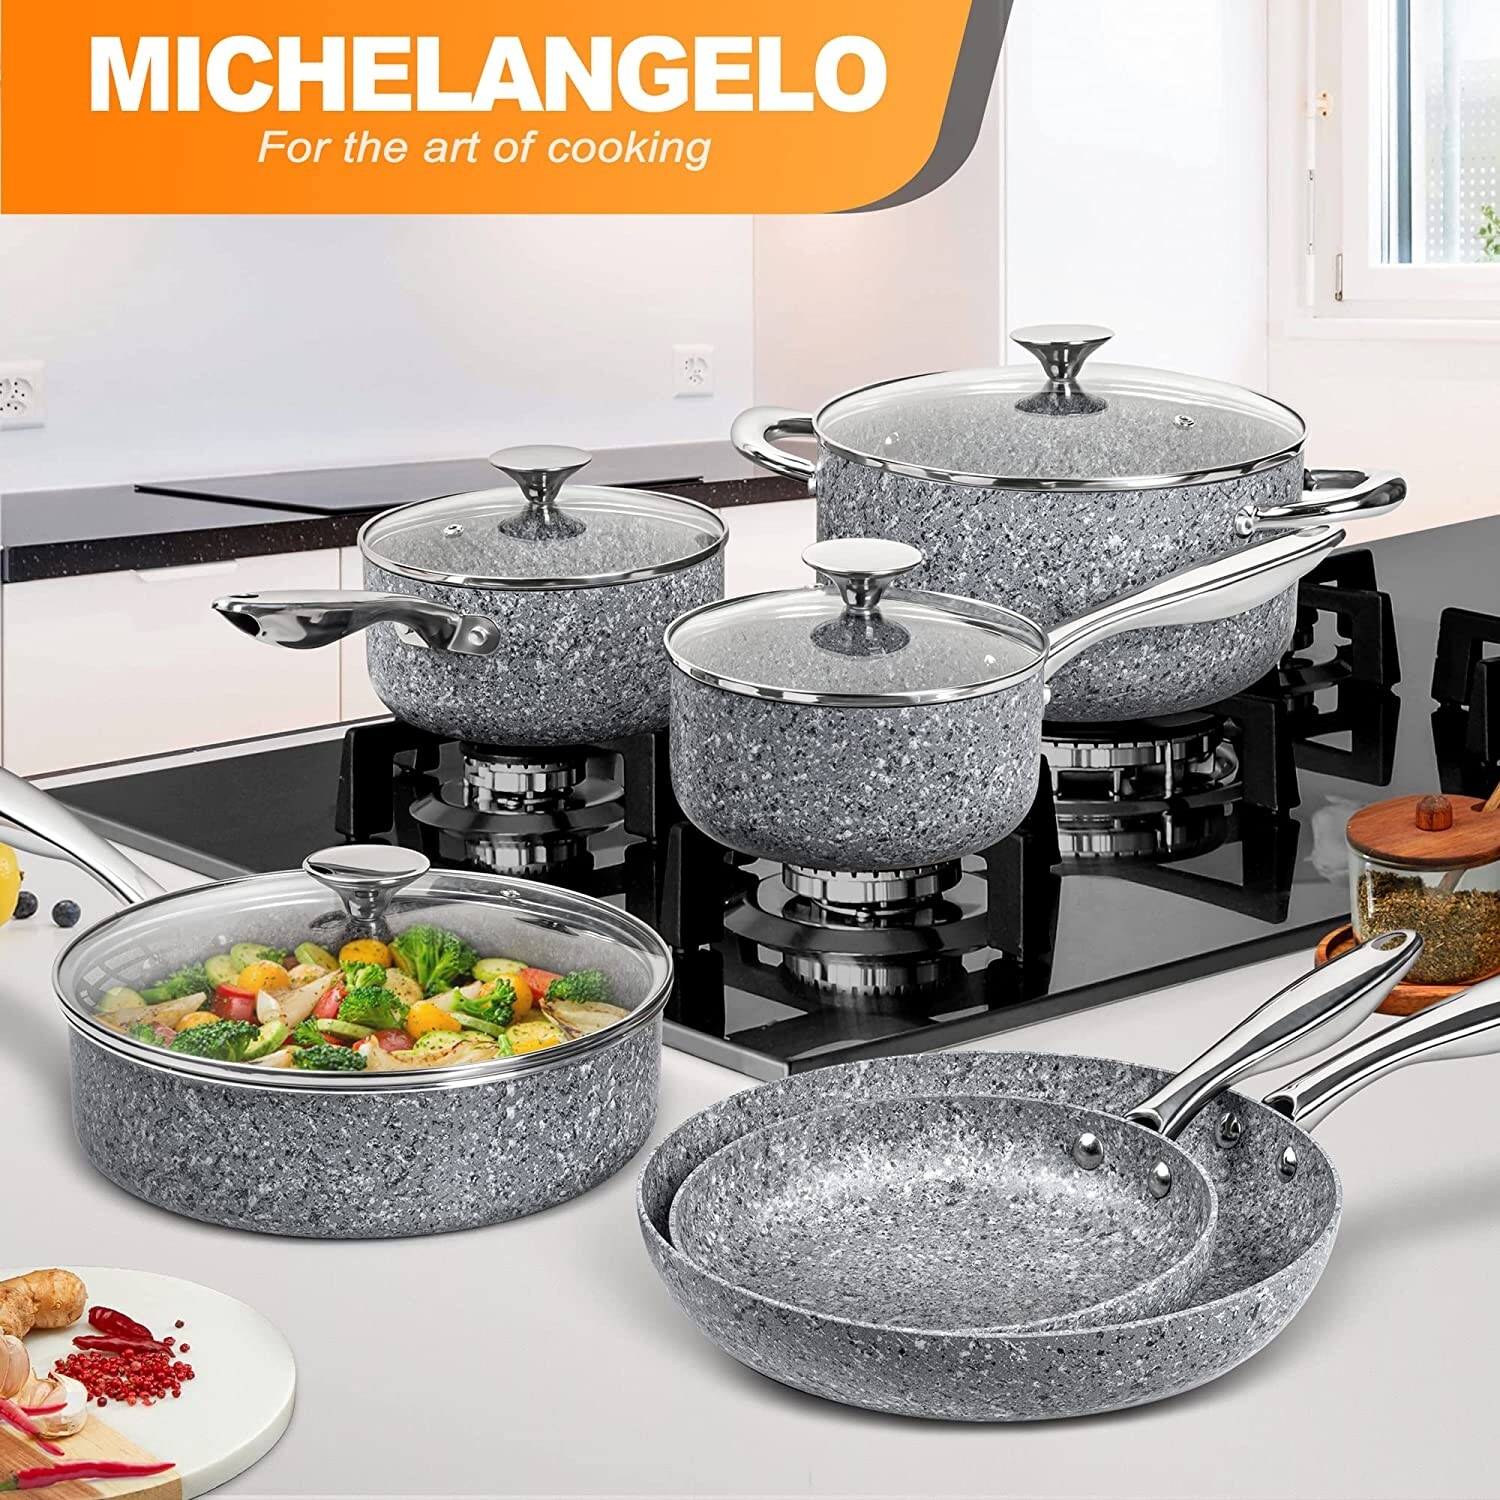 Michelangelo michelangelo hard anodized cookware set, 10-piece pots and pans  set nonstick with granite interior, non toxic cookware set in